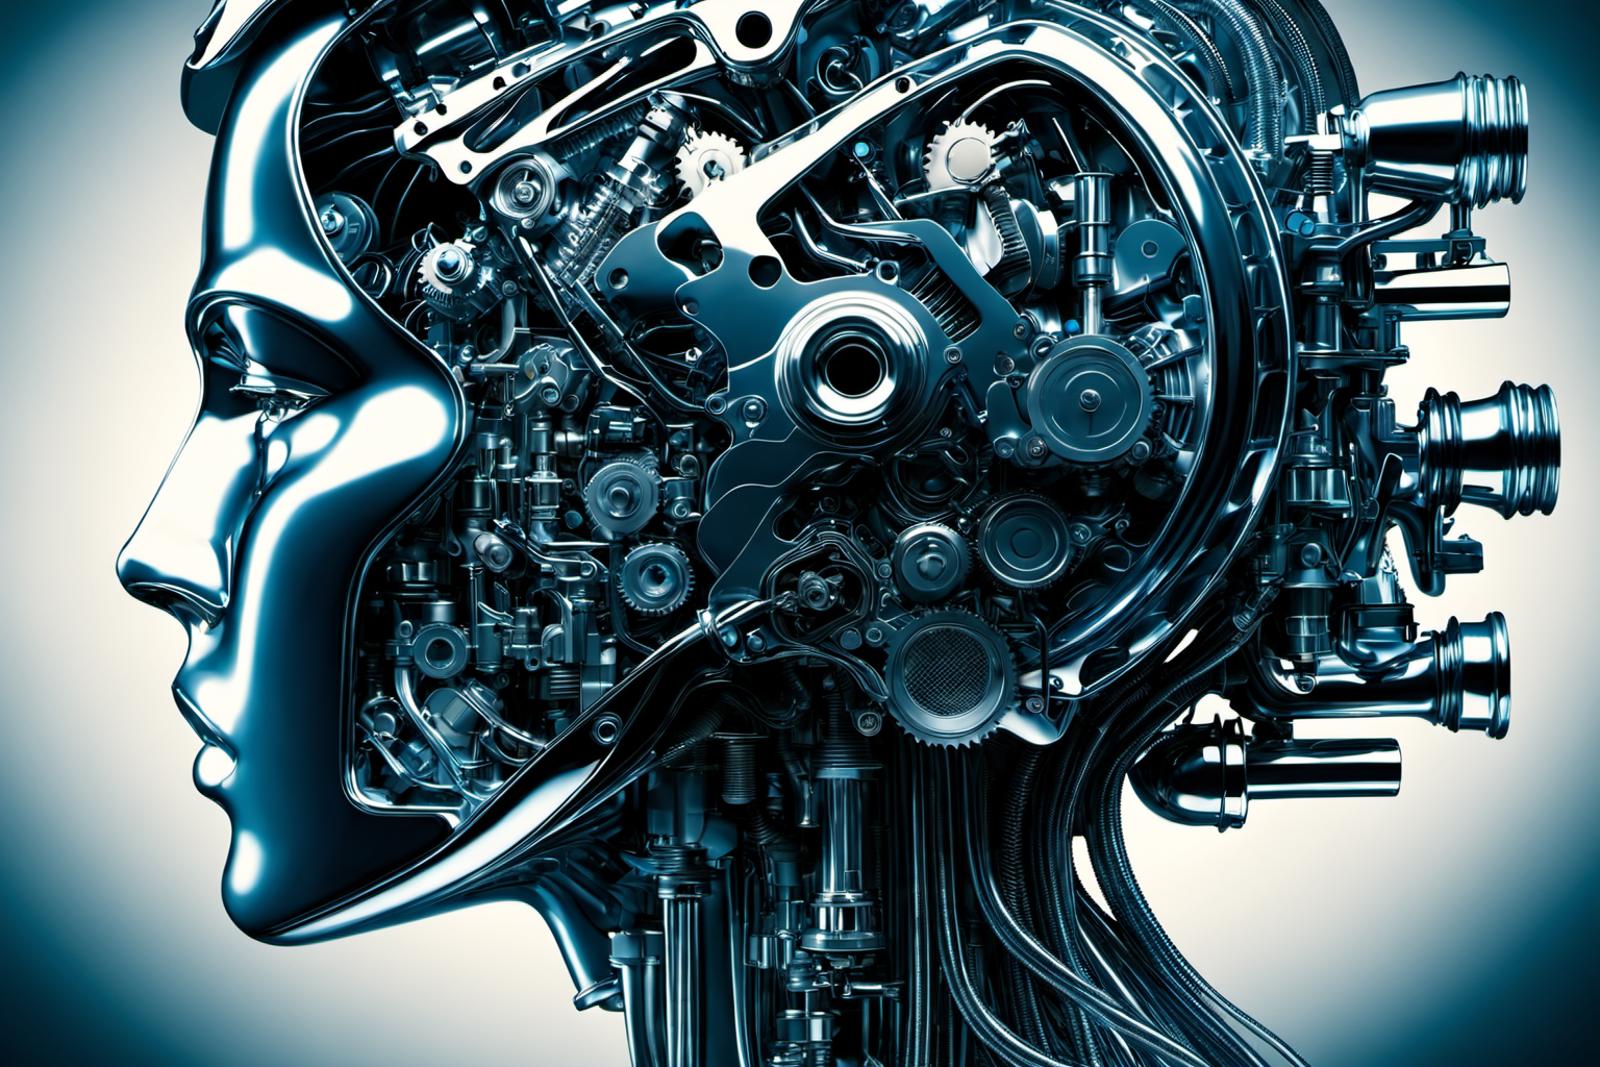 A robotic head made of gears and mechanisms.